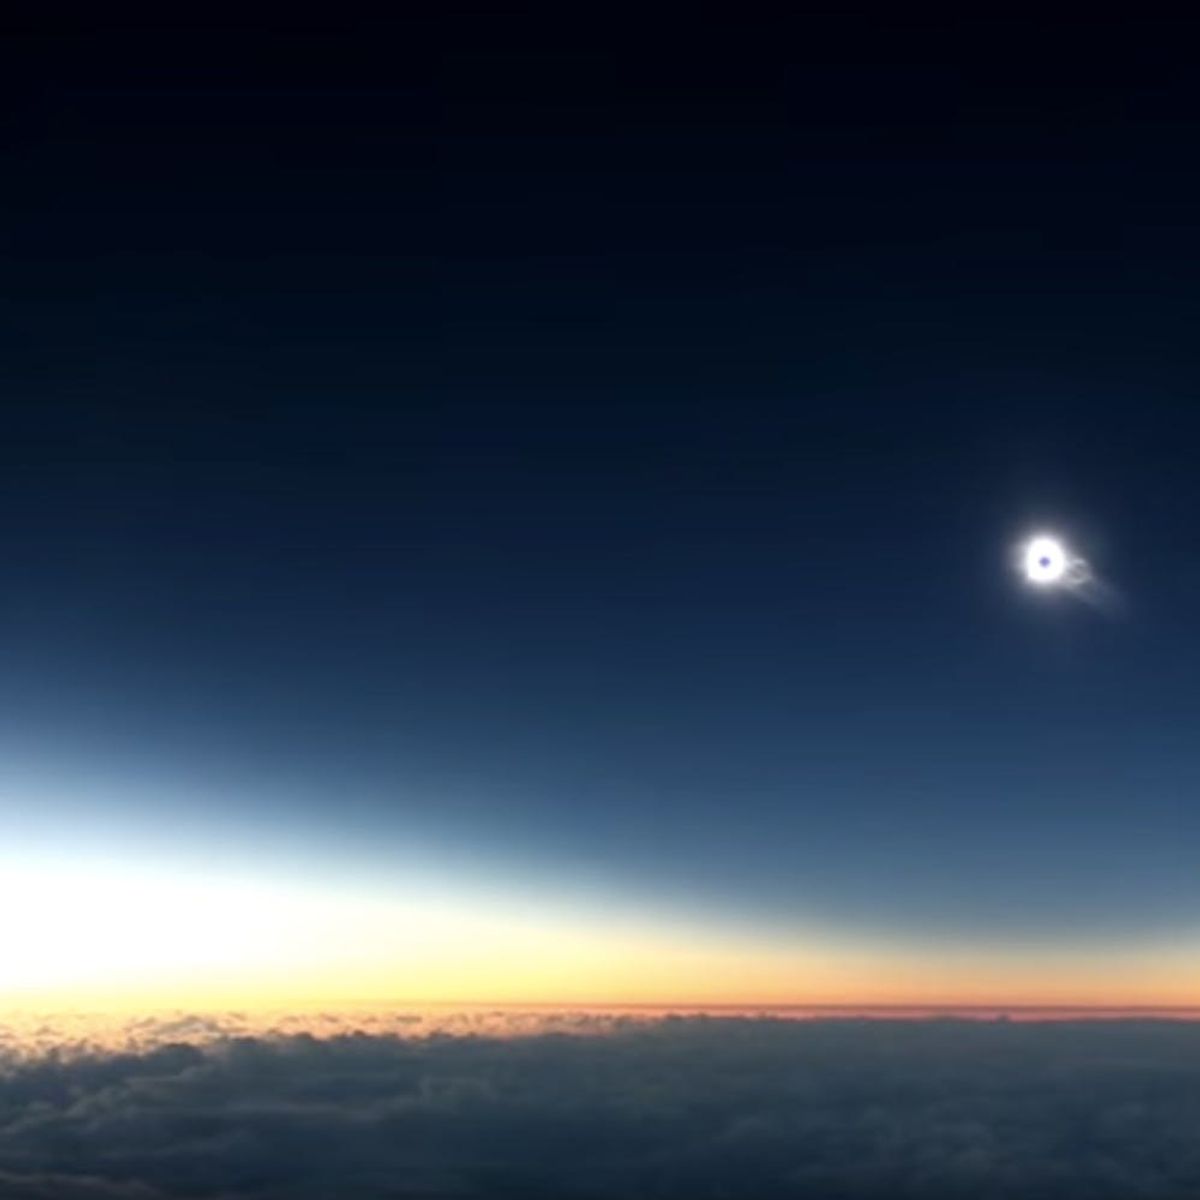 This Once-in-a-Lifetime Solar Eclipse Flight Will Inspire Your Next Art Project